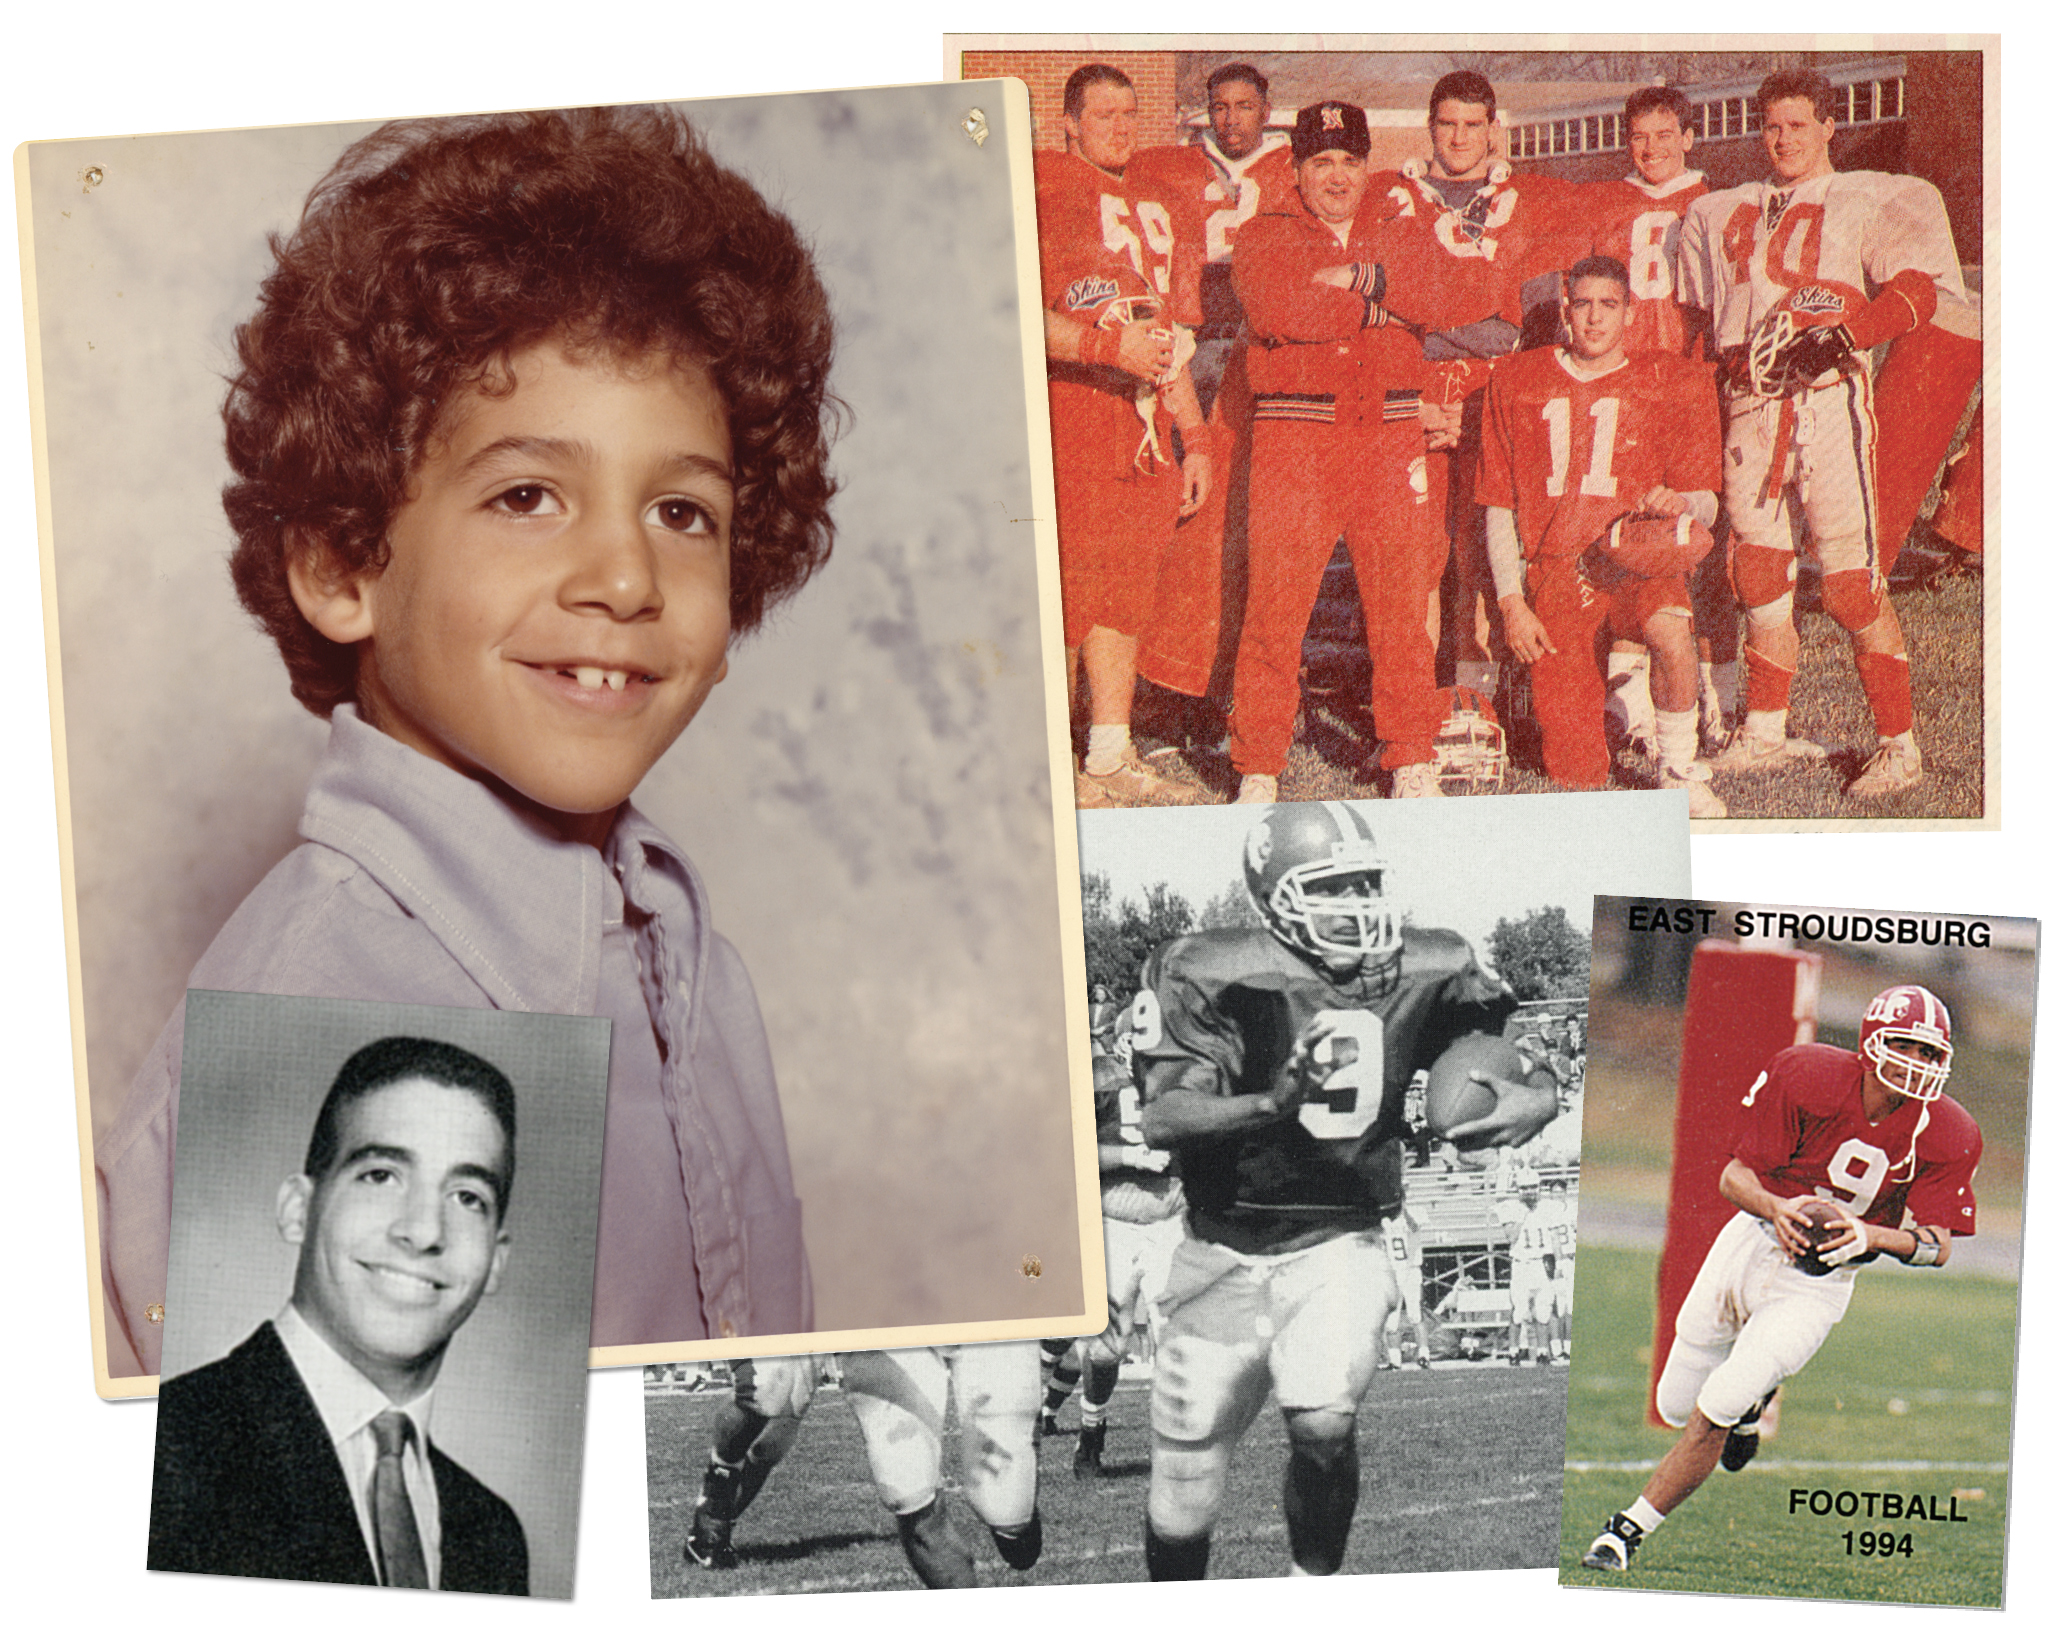 collage of photos of a young James Franklin as a child and playing football, courtesy